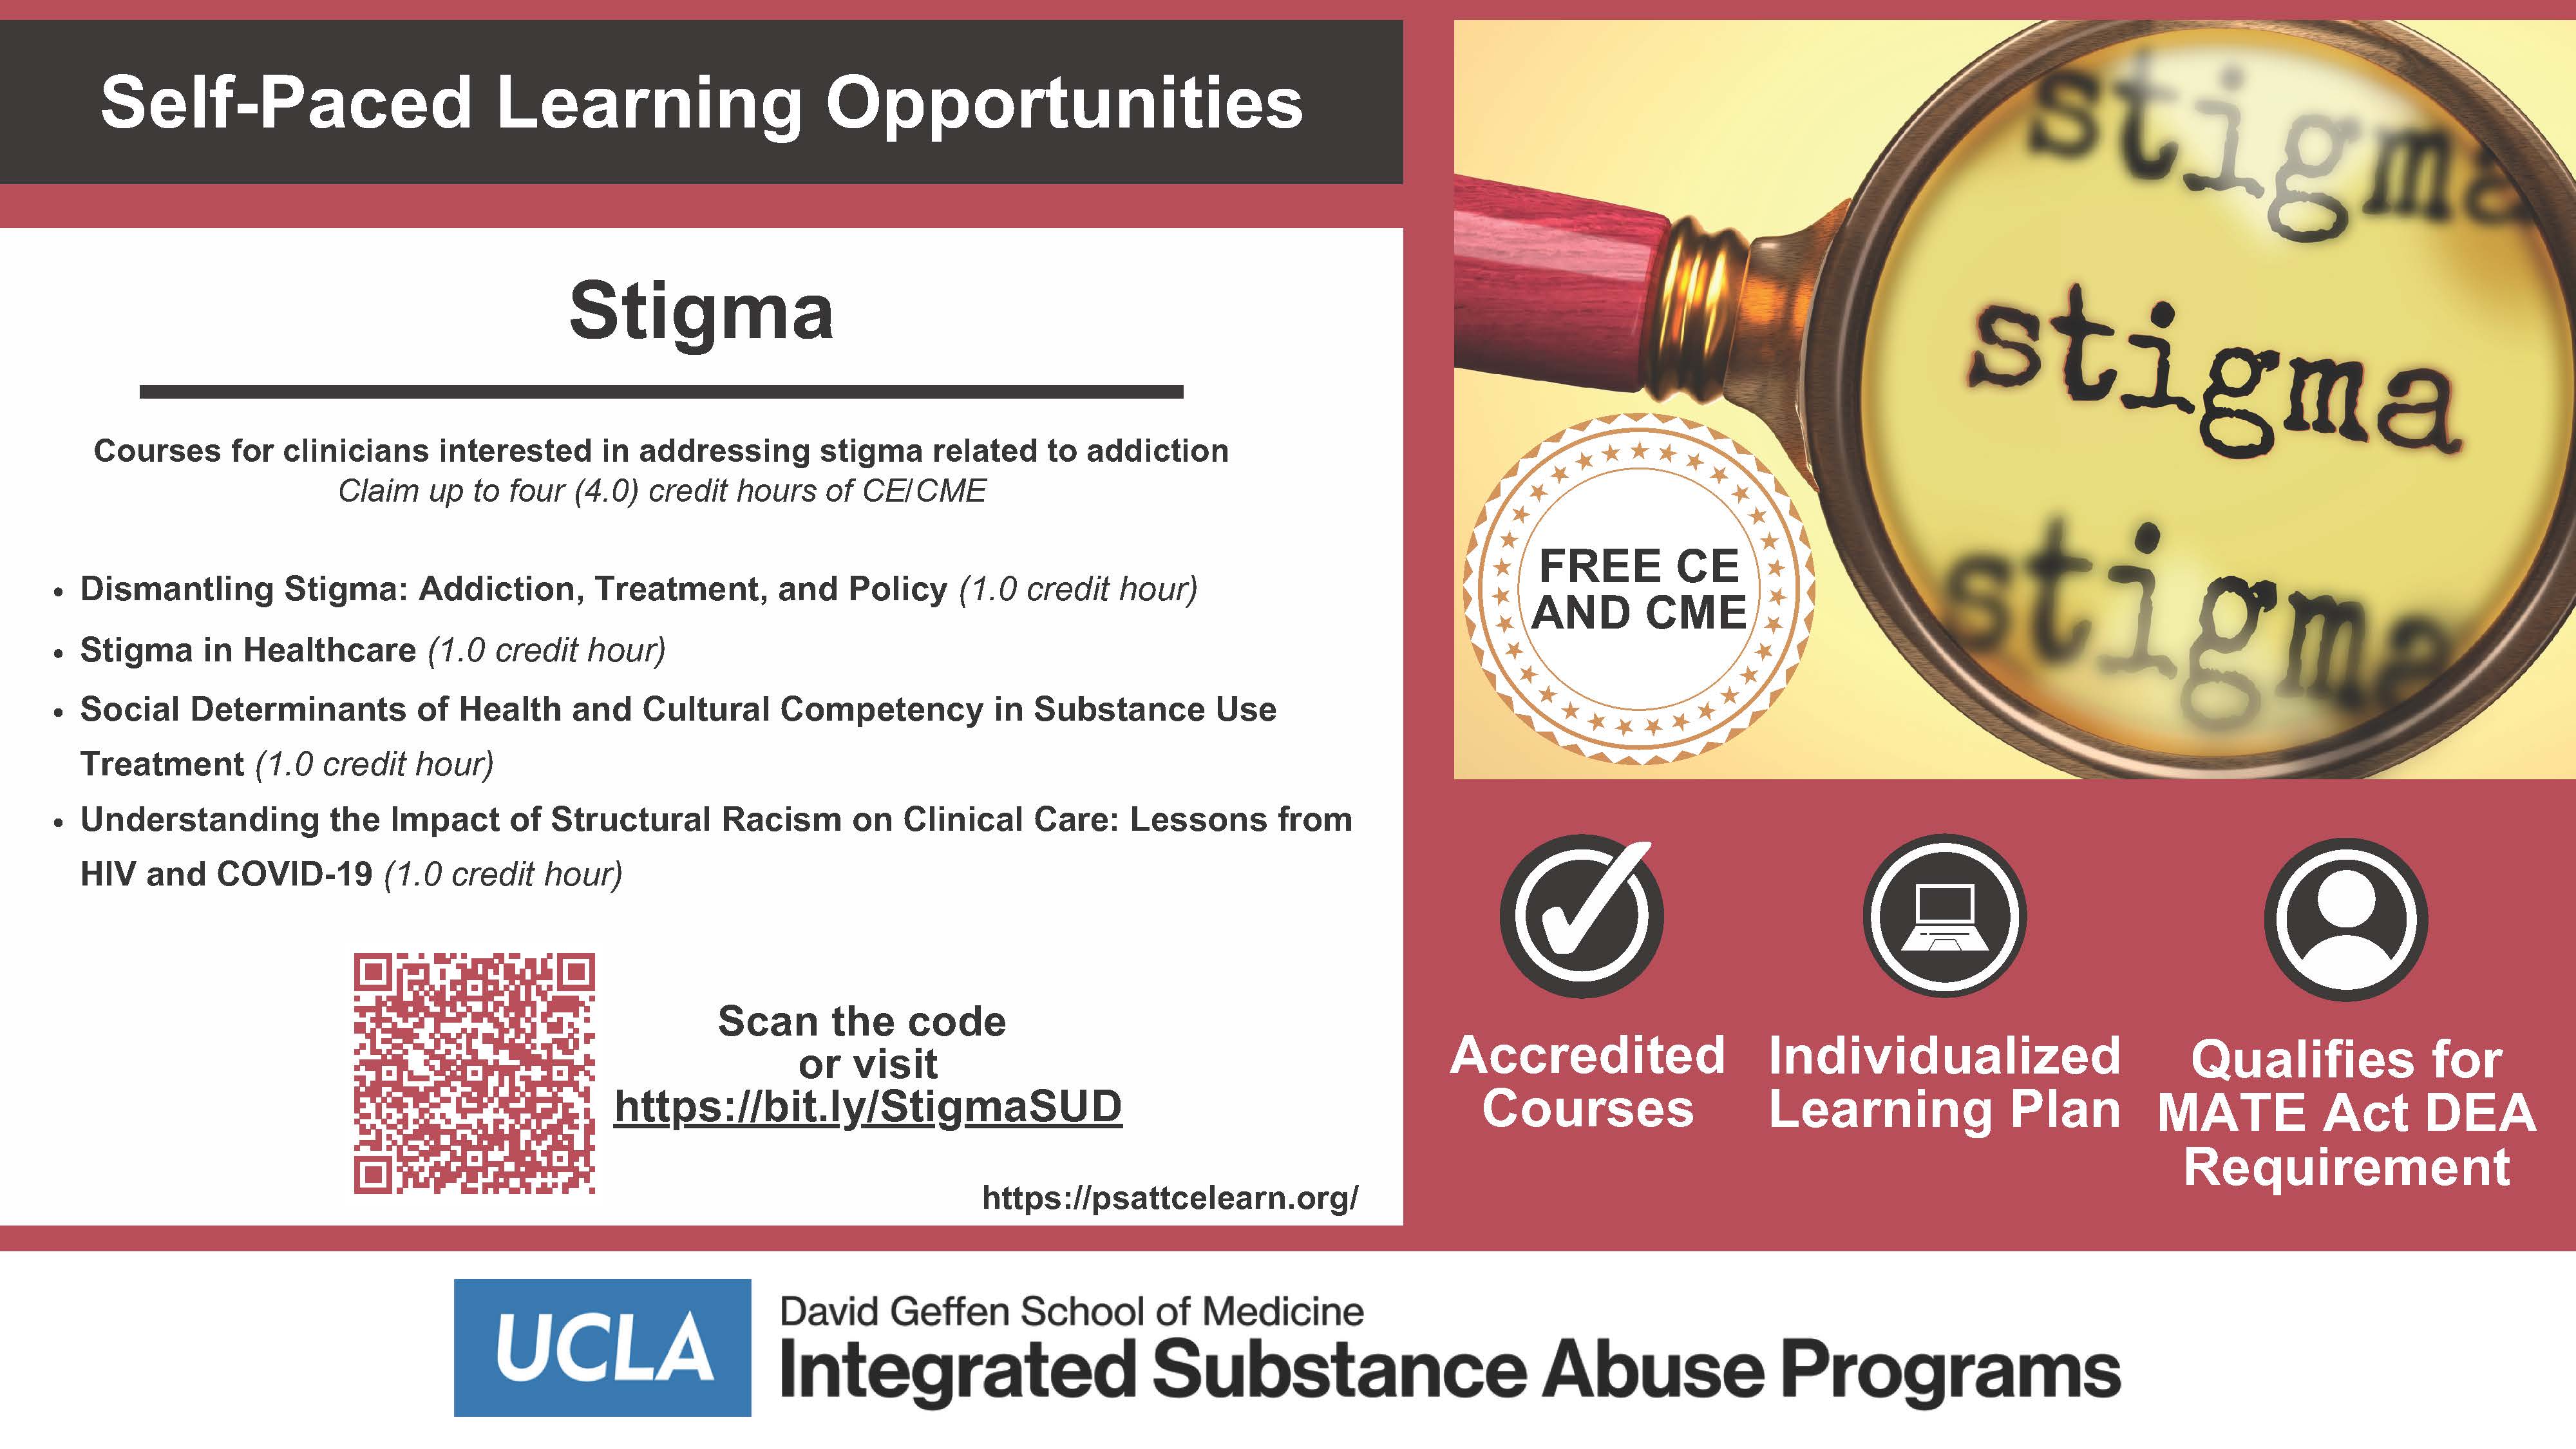 Flyer for Stigma on-demand learning